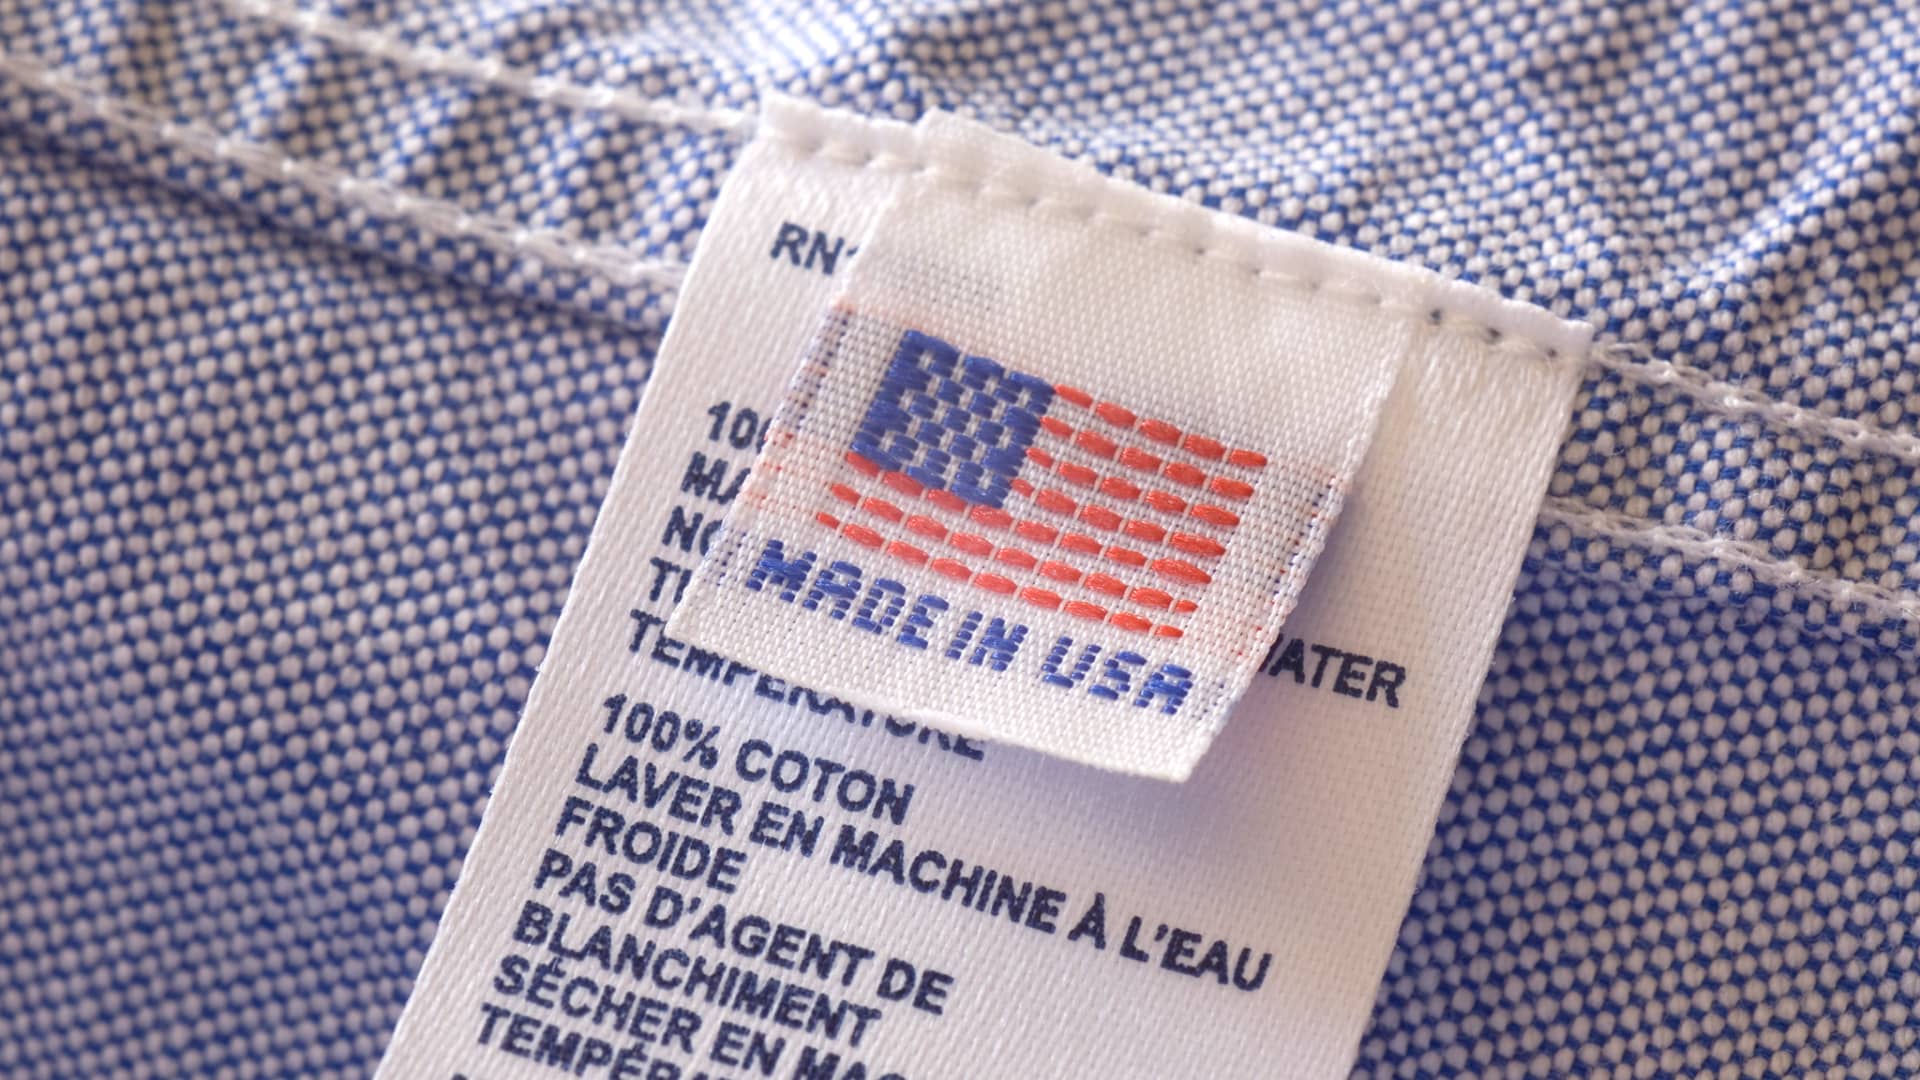 Us com product. Made in u.s.a упаковка. Made in USA. Epoxid made in USA В пакете. Made in USA 0-3136.